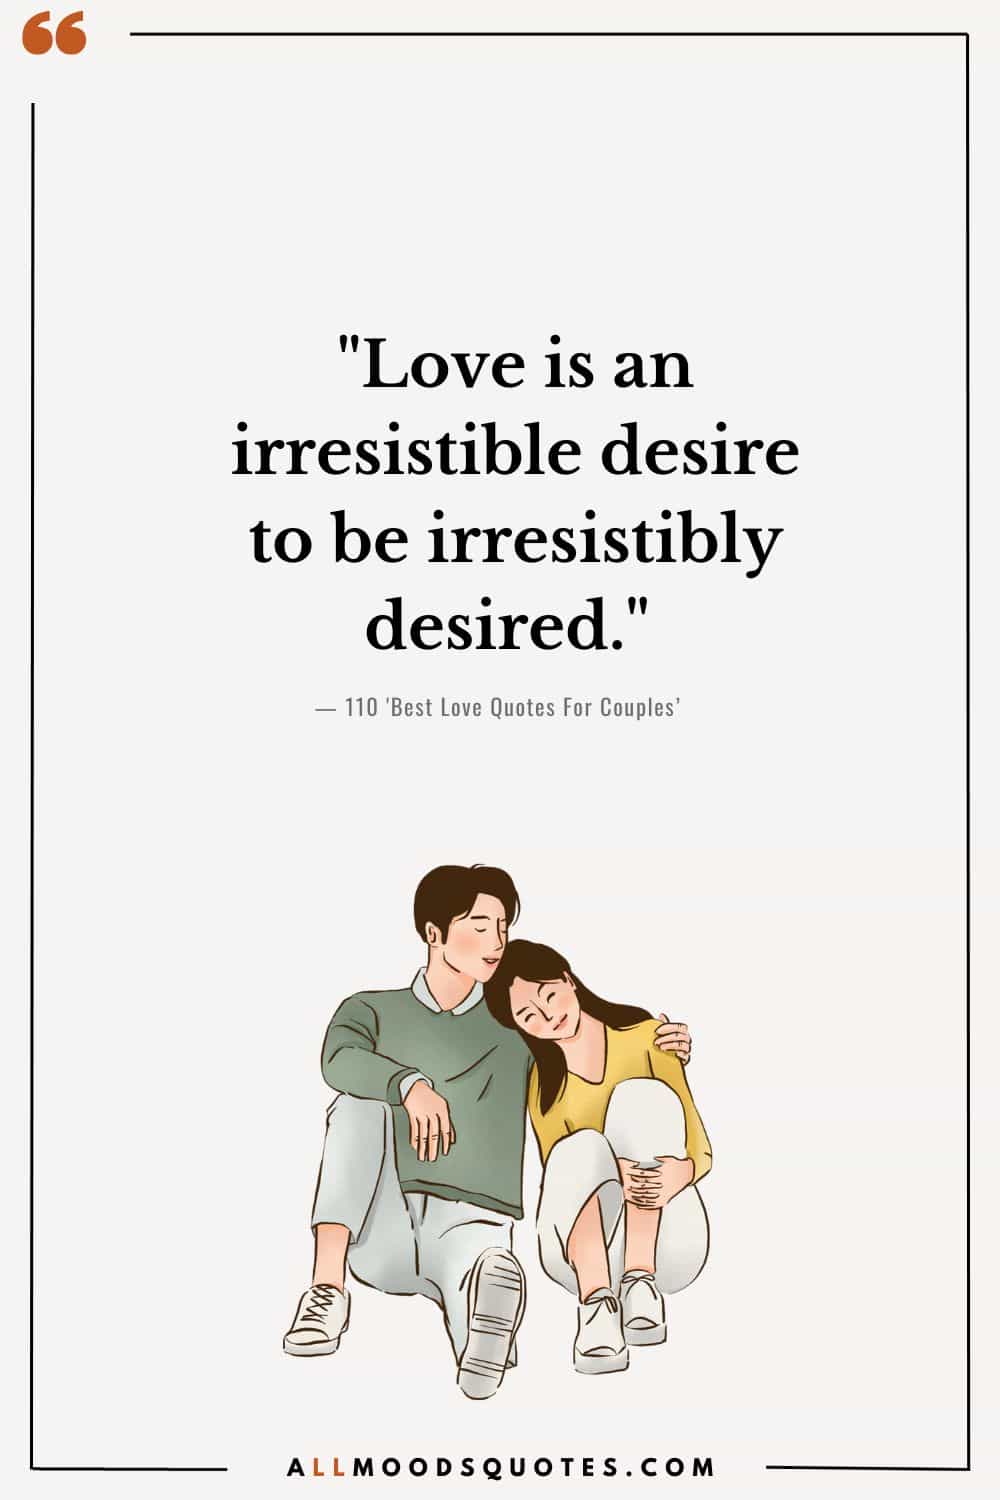 "Love is an irresistible desire to be irresistibly desired." — Robert Frost